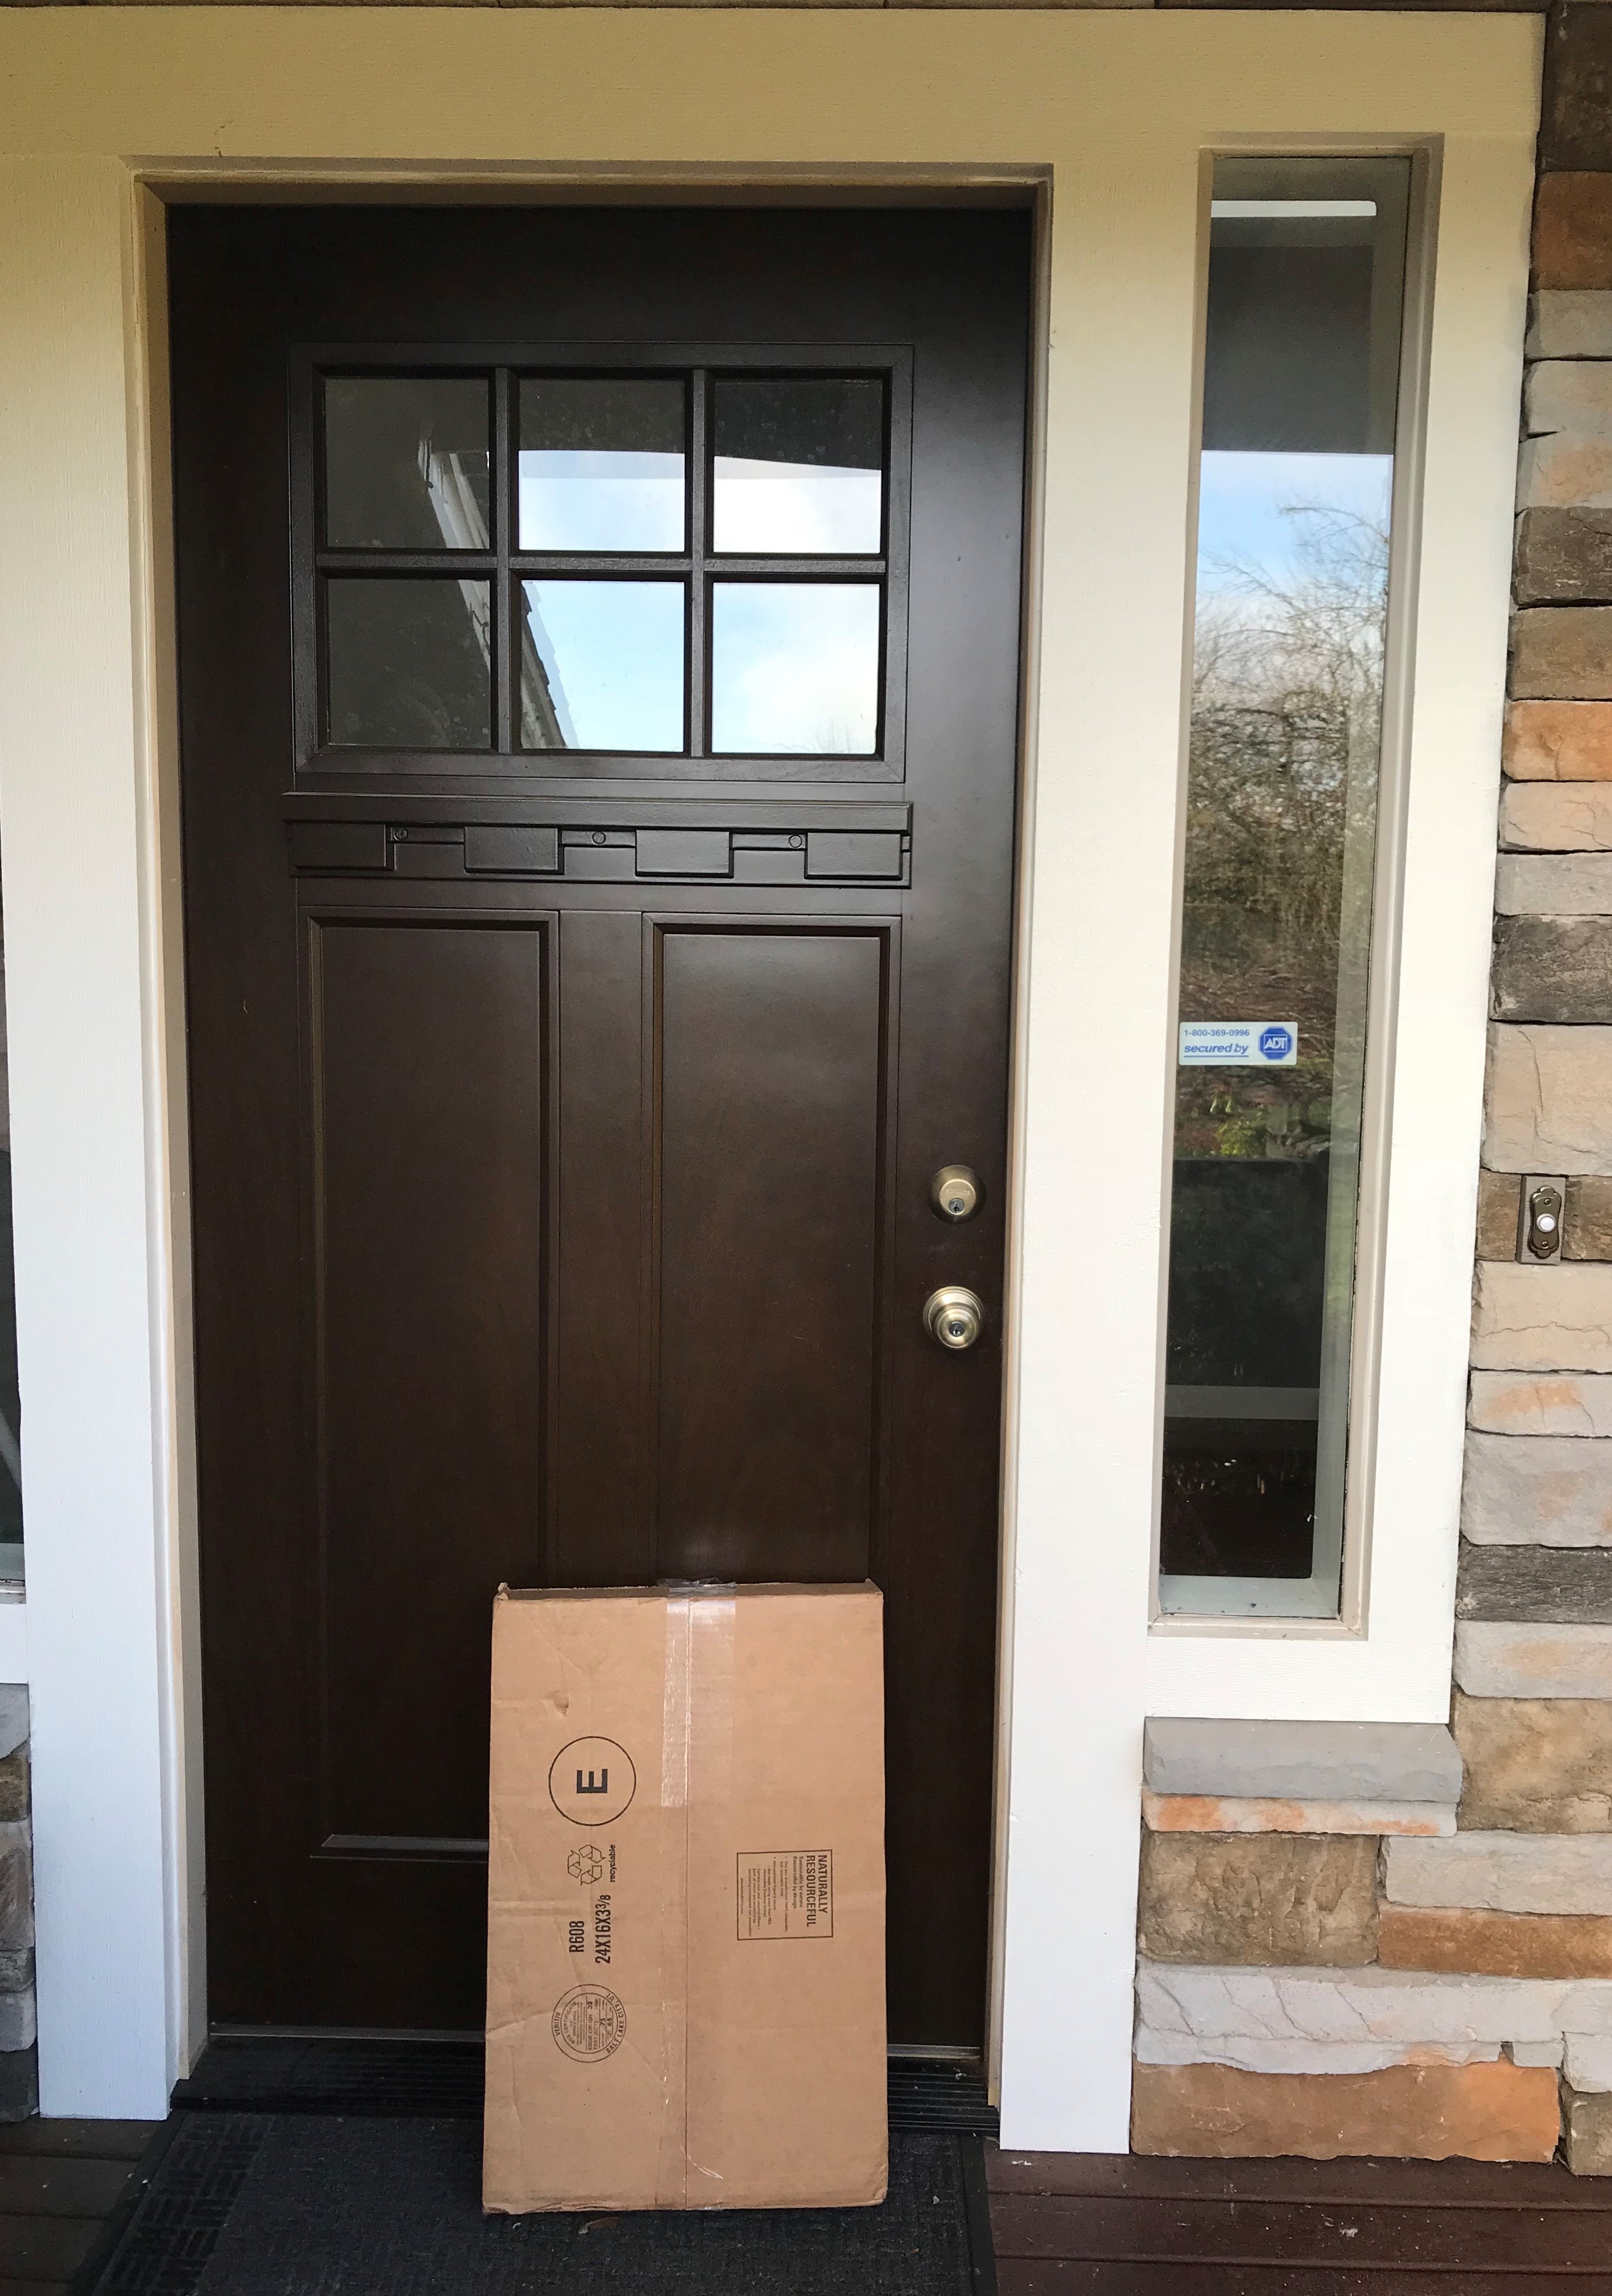 How to avoid holiday package theft in Edmonds, WA